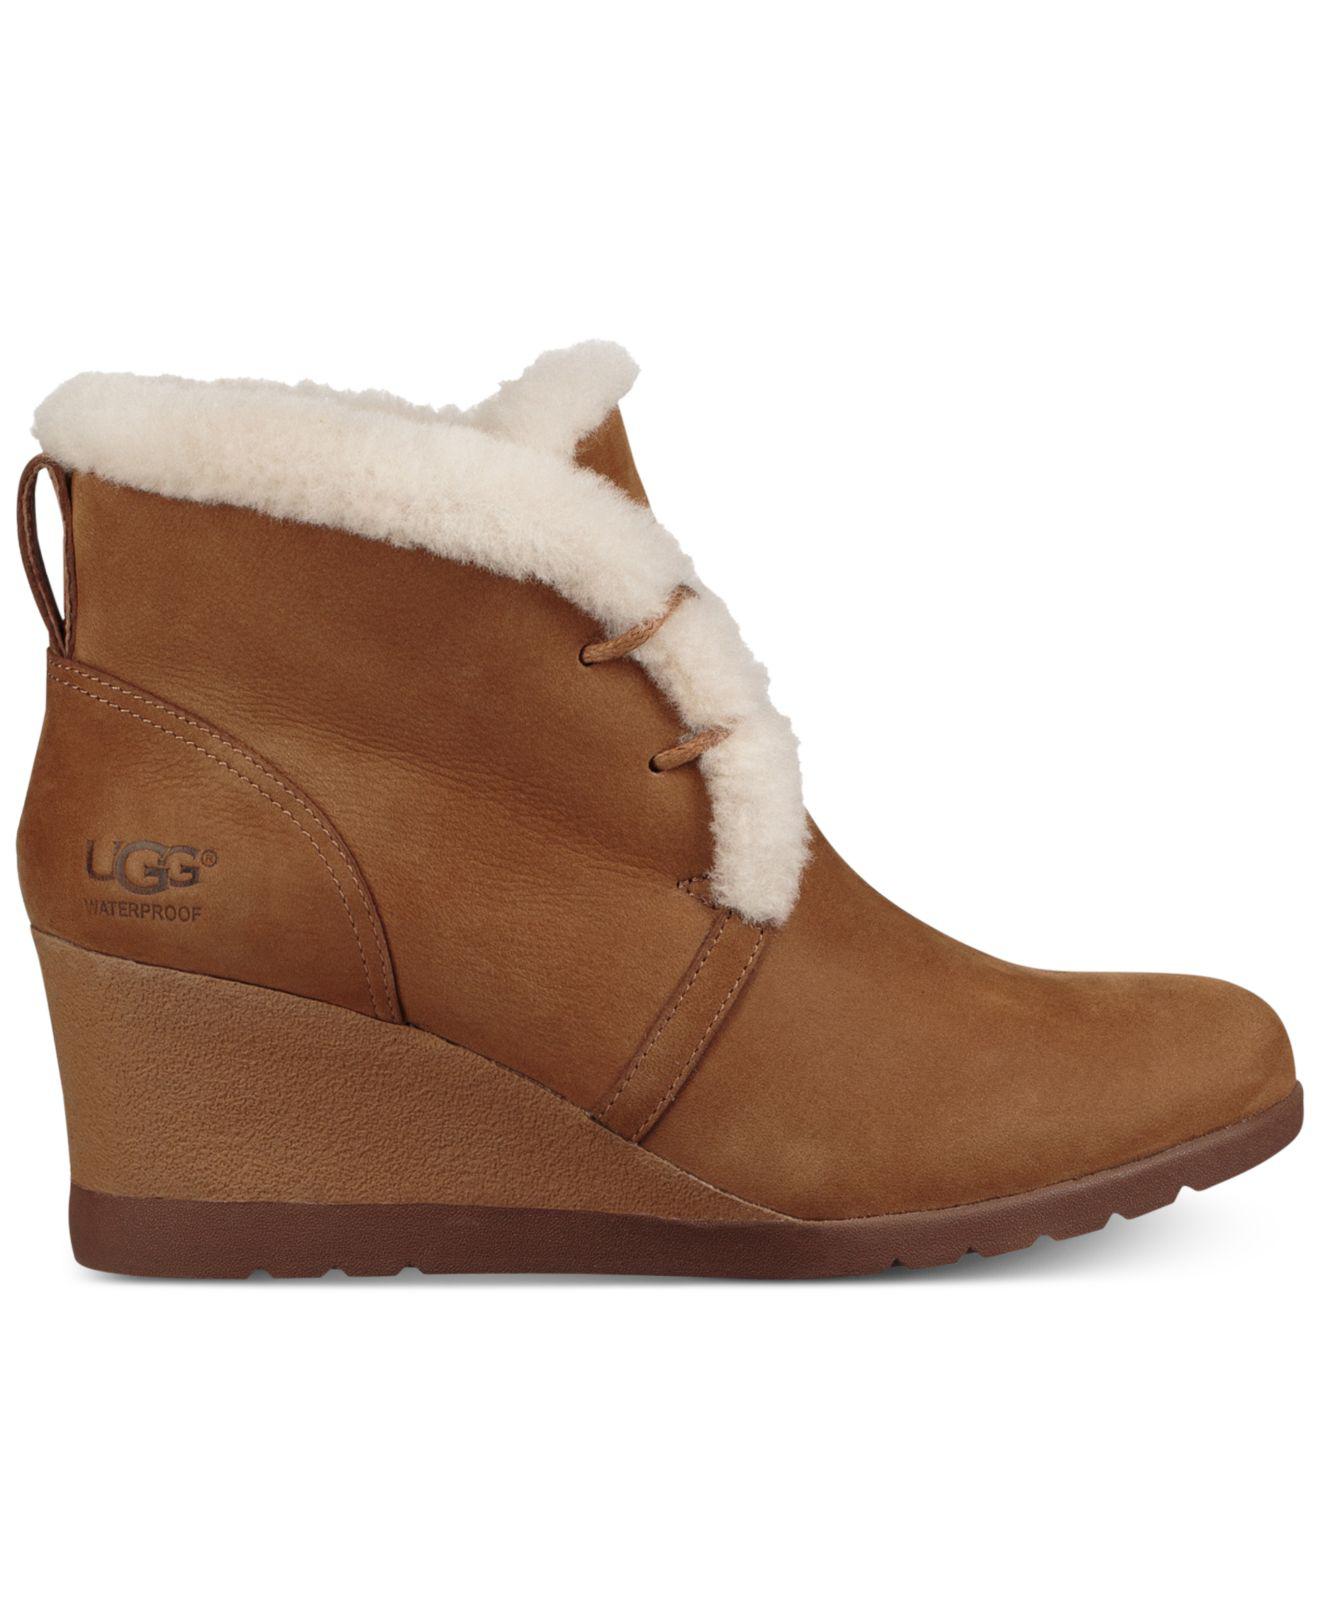 UGG Wool Jeovana Wedge Lace-up Booties in Chestnut (Brown) - Lyst